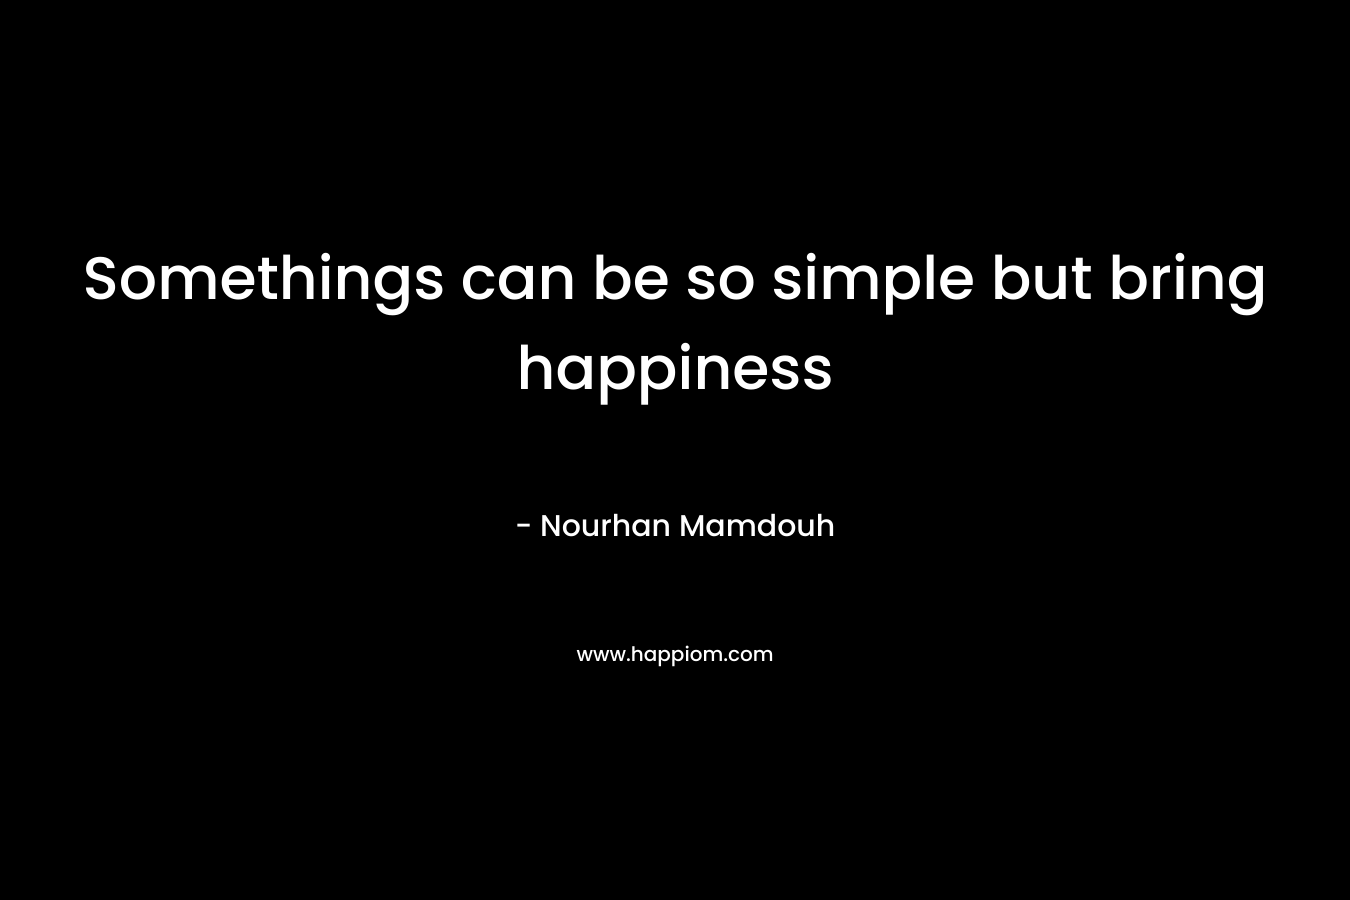 Somethings can be so simple but bring happiness – Nourhan Mamdouh